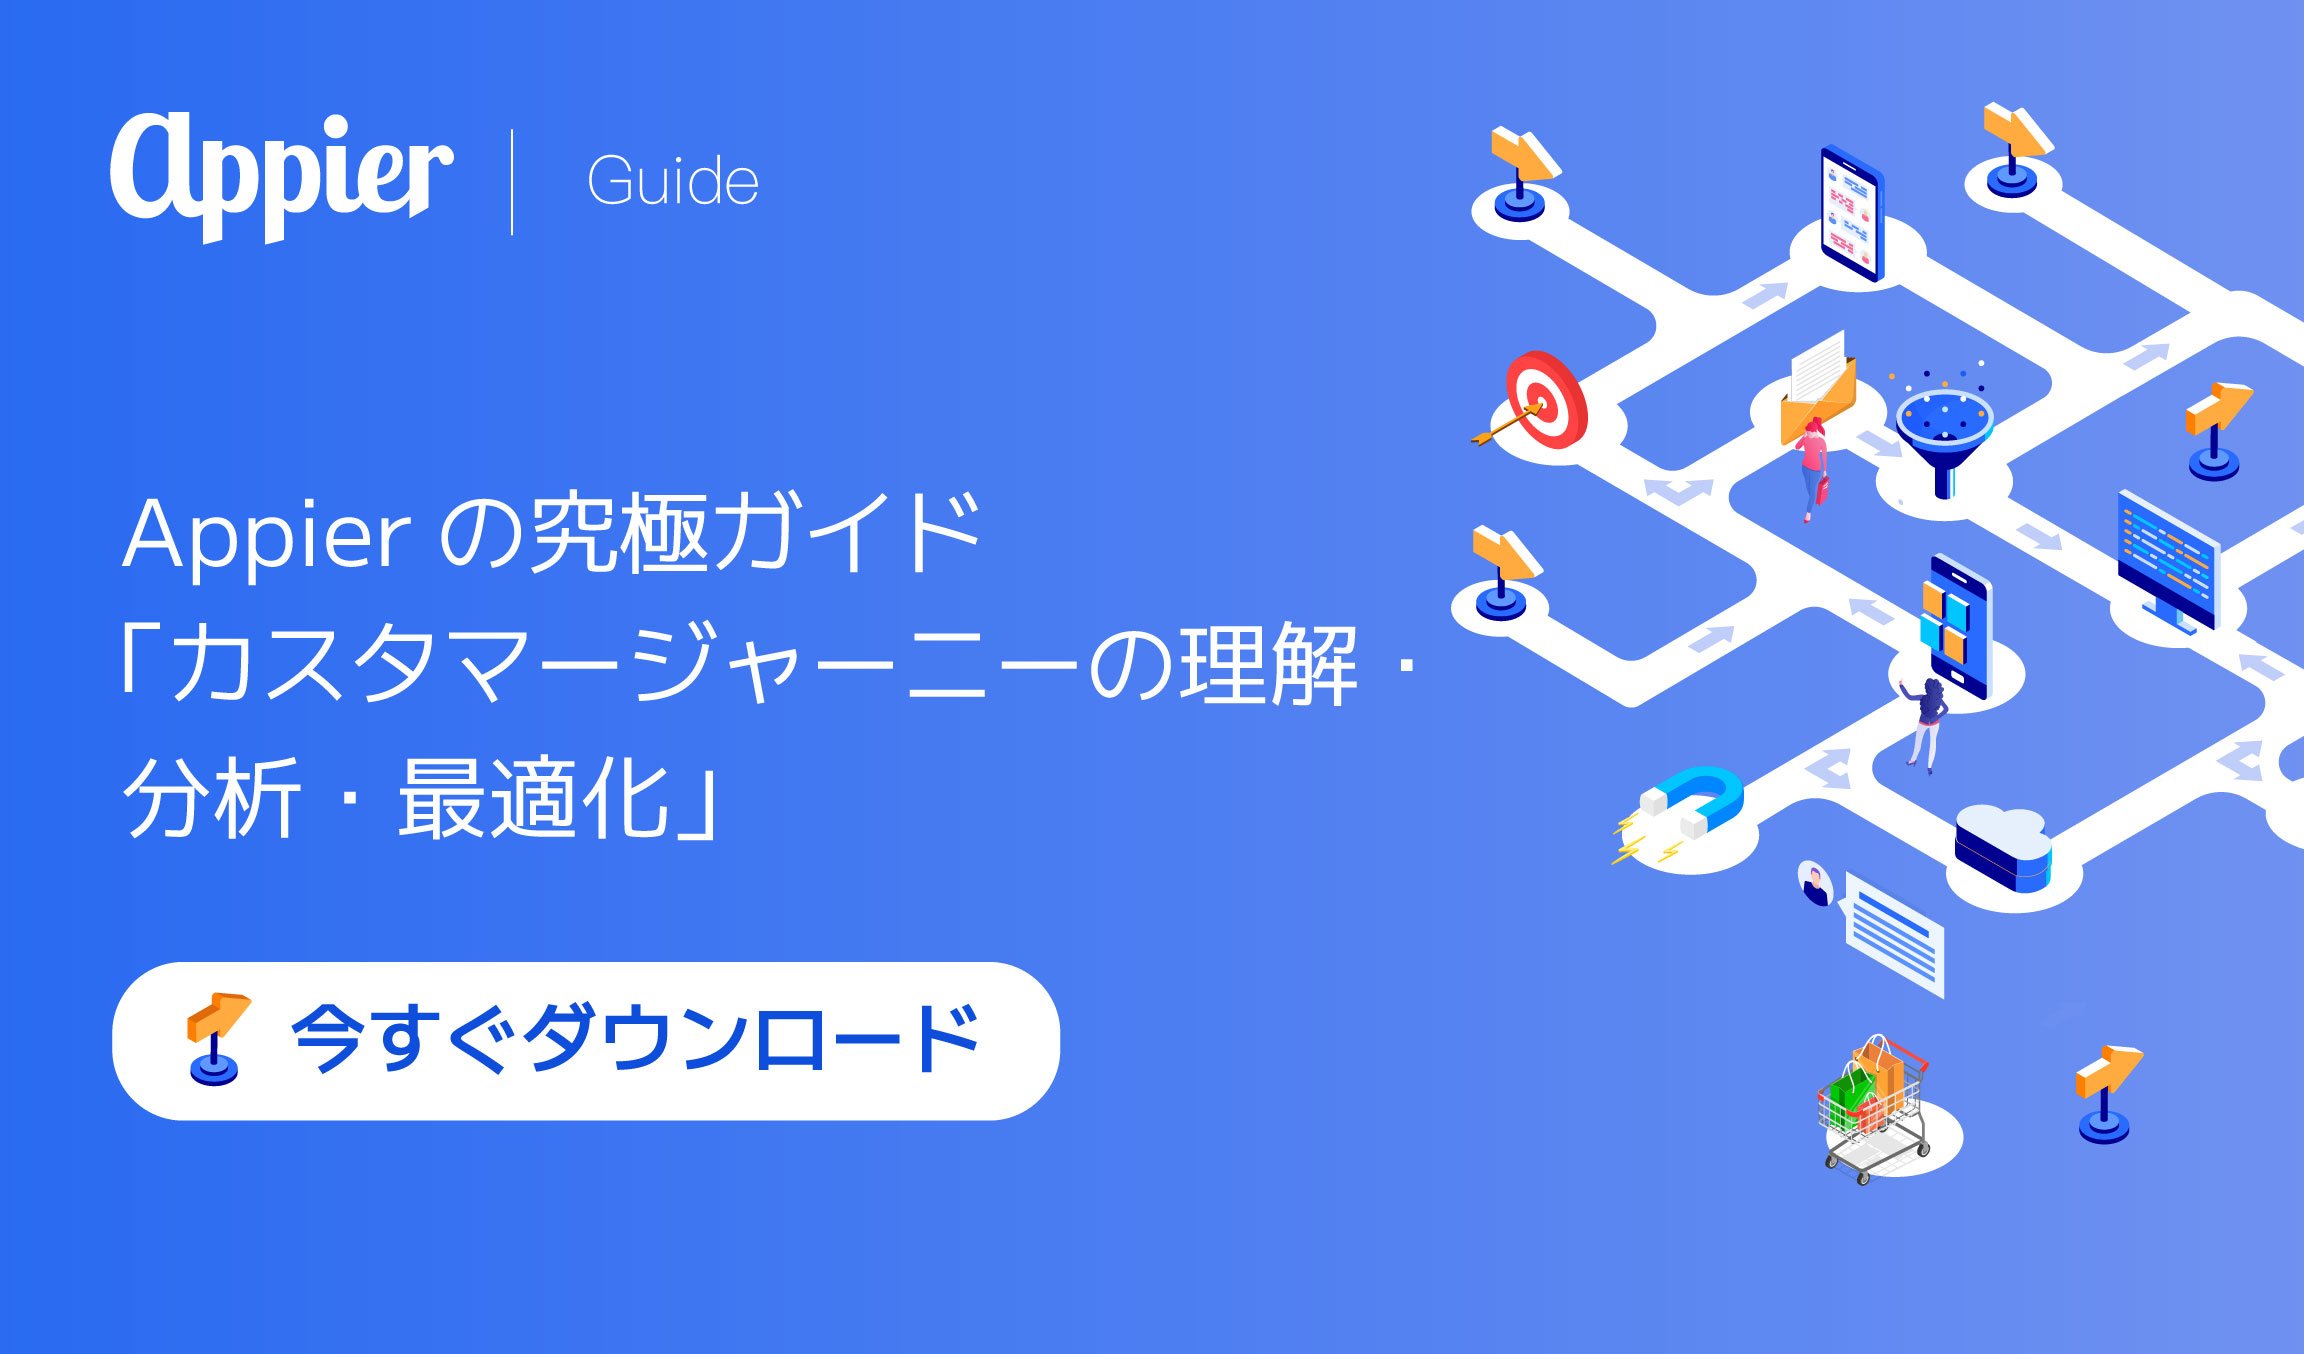 Content_Appier Ultimate Guide to Understanding Analyzing and Optimizing the Customer Journey_Header_JP